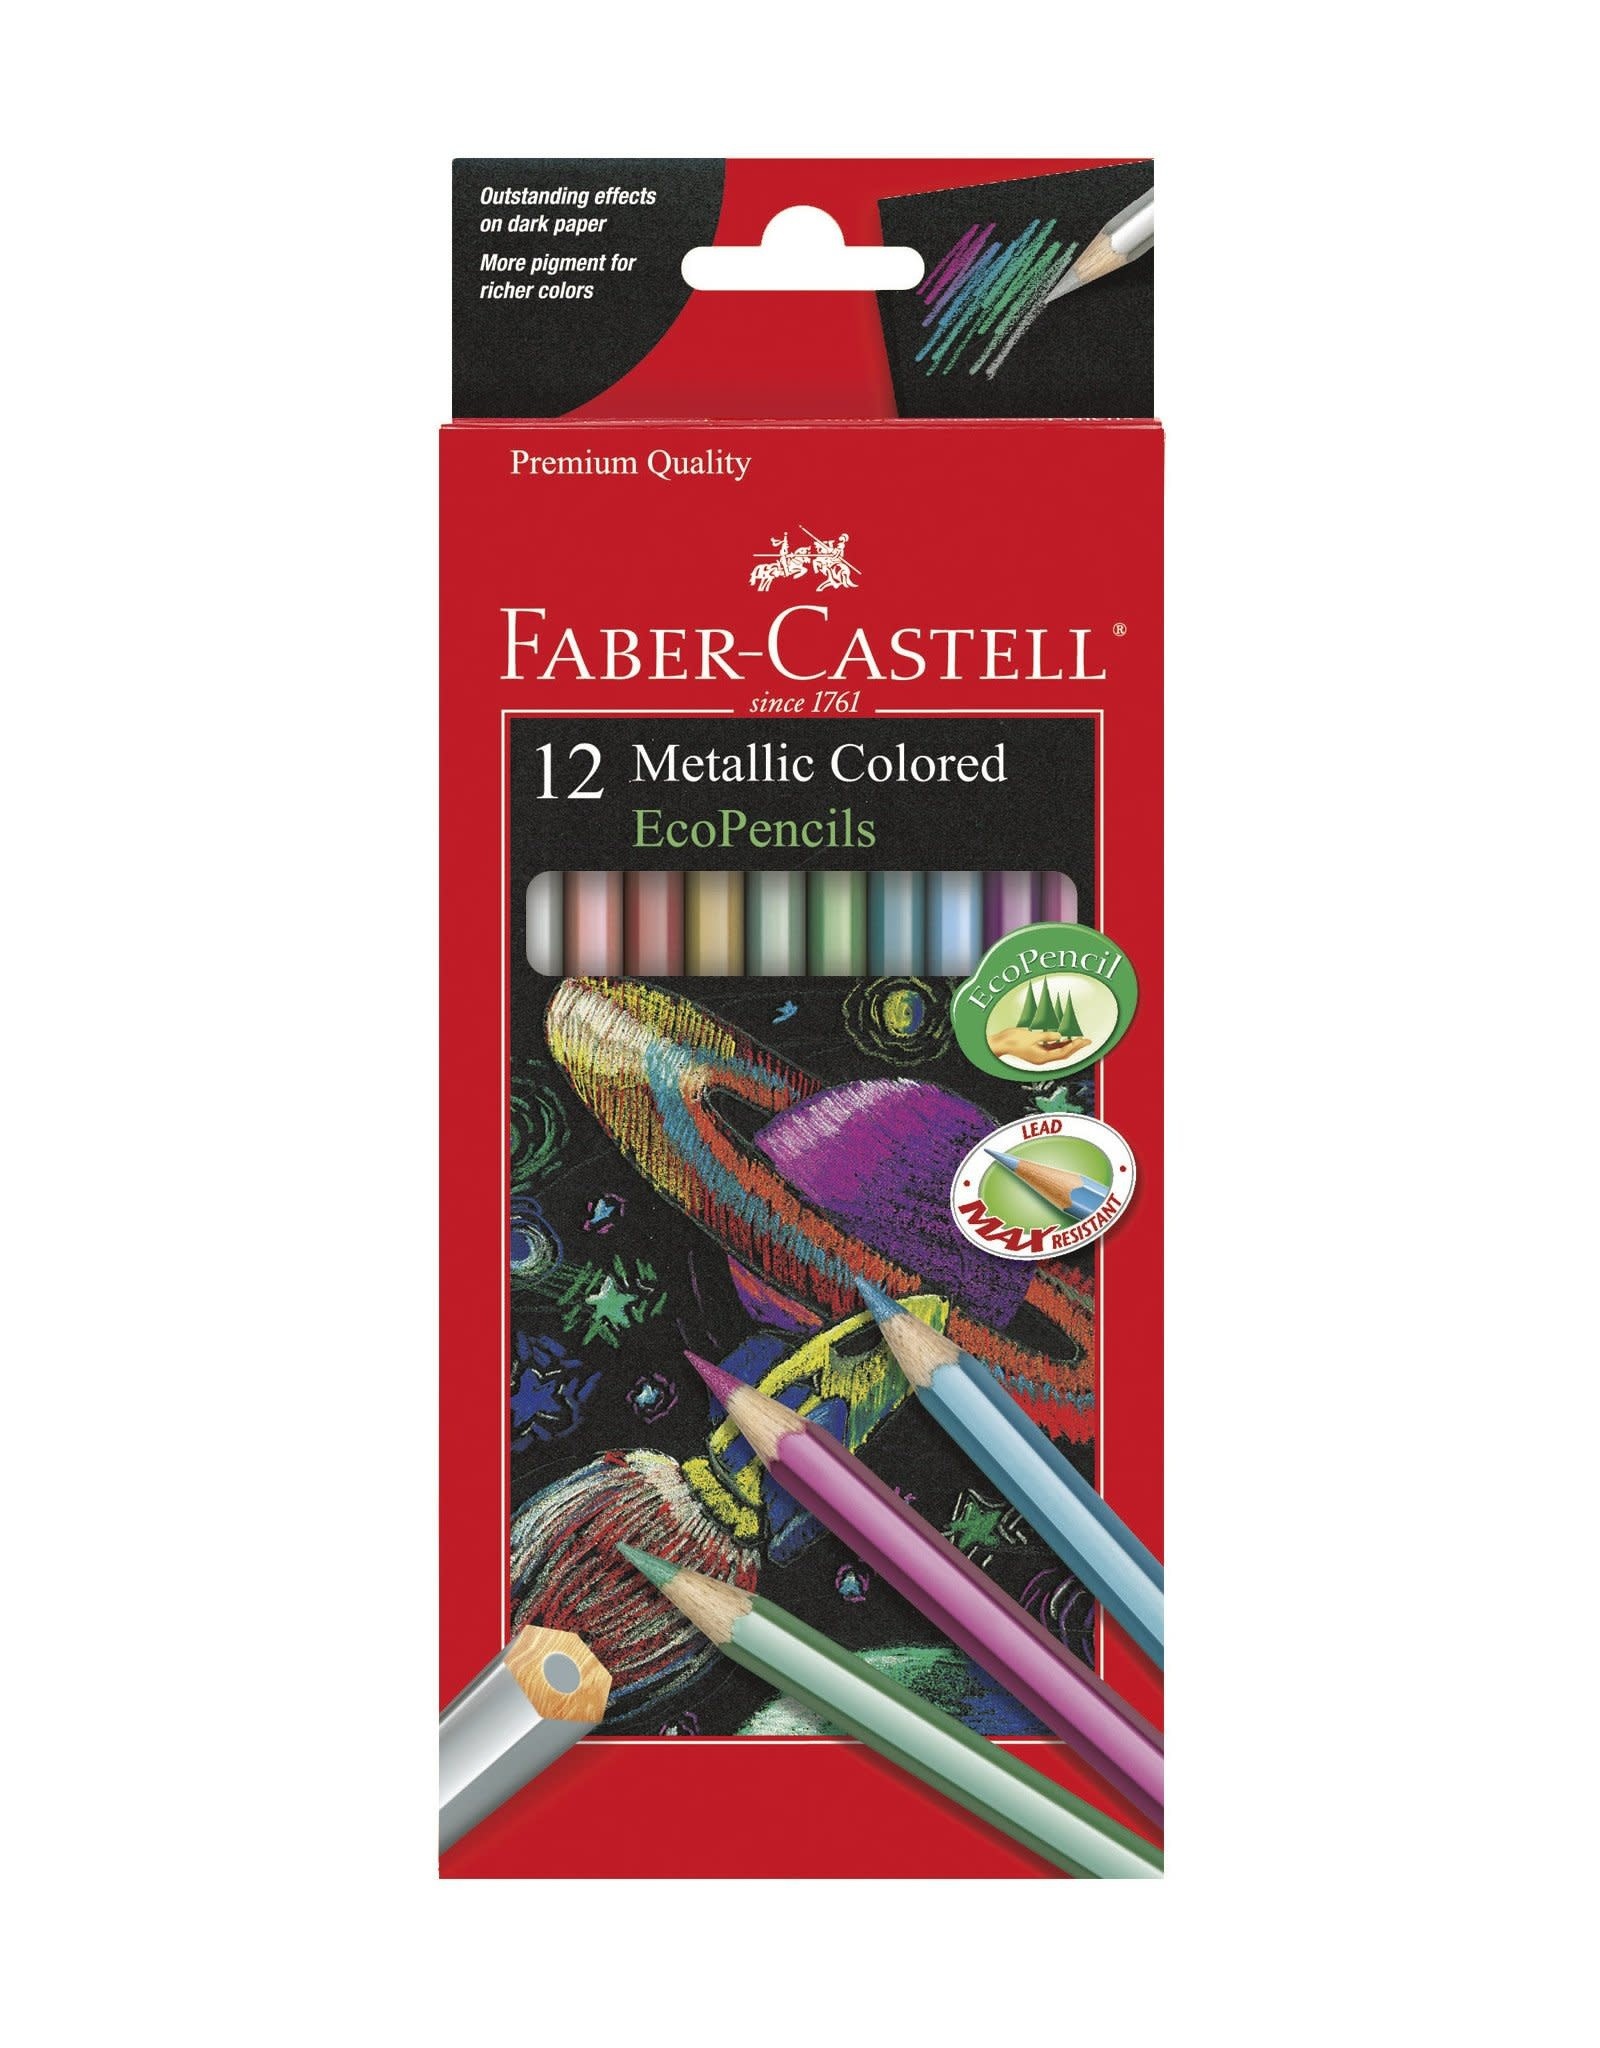 Faber-Castell 12ct Metallic Colored EcoPencils